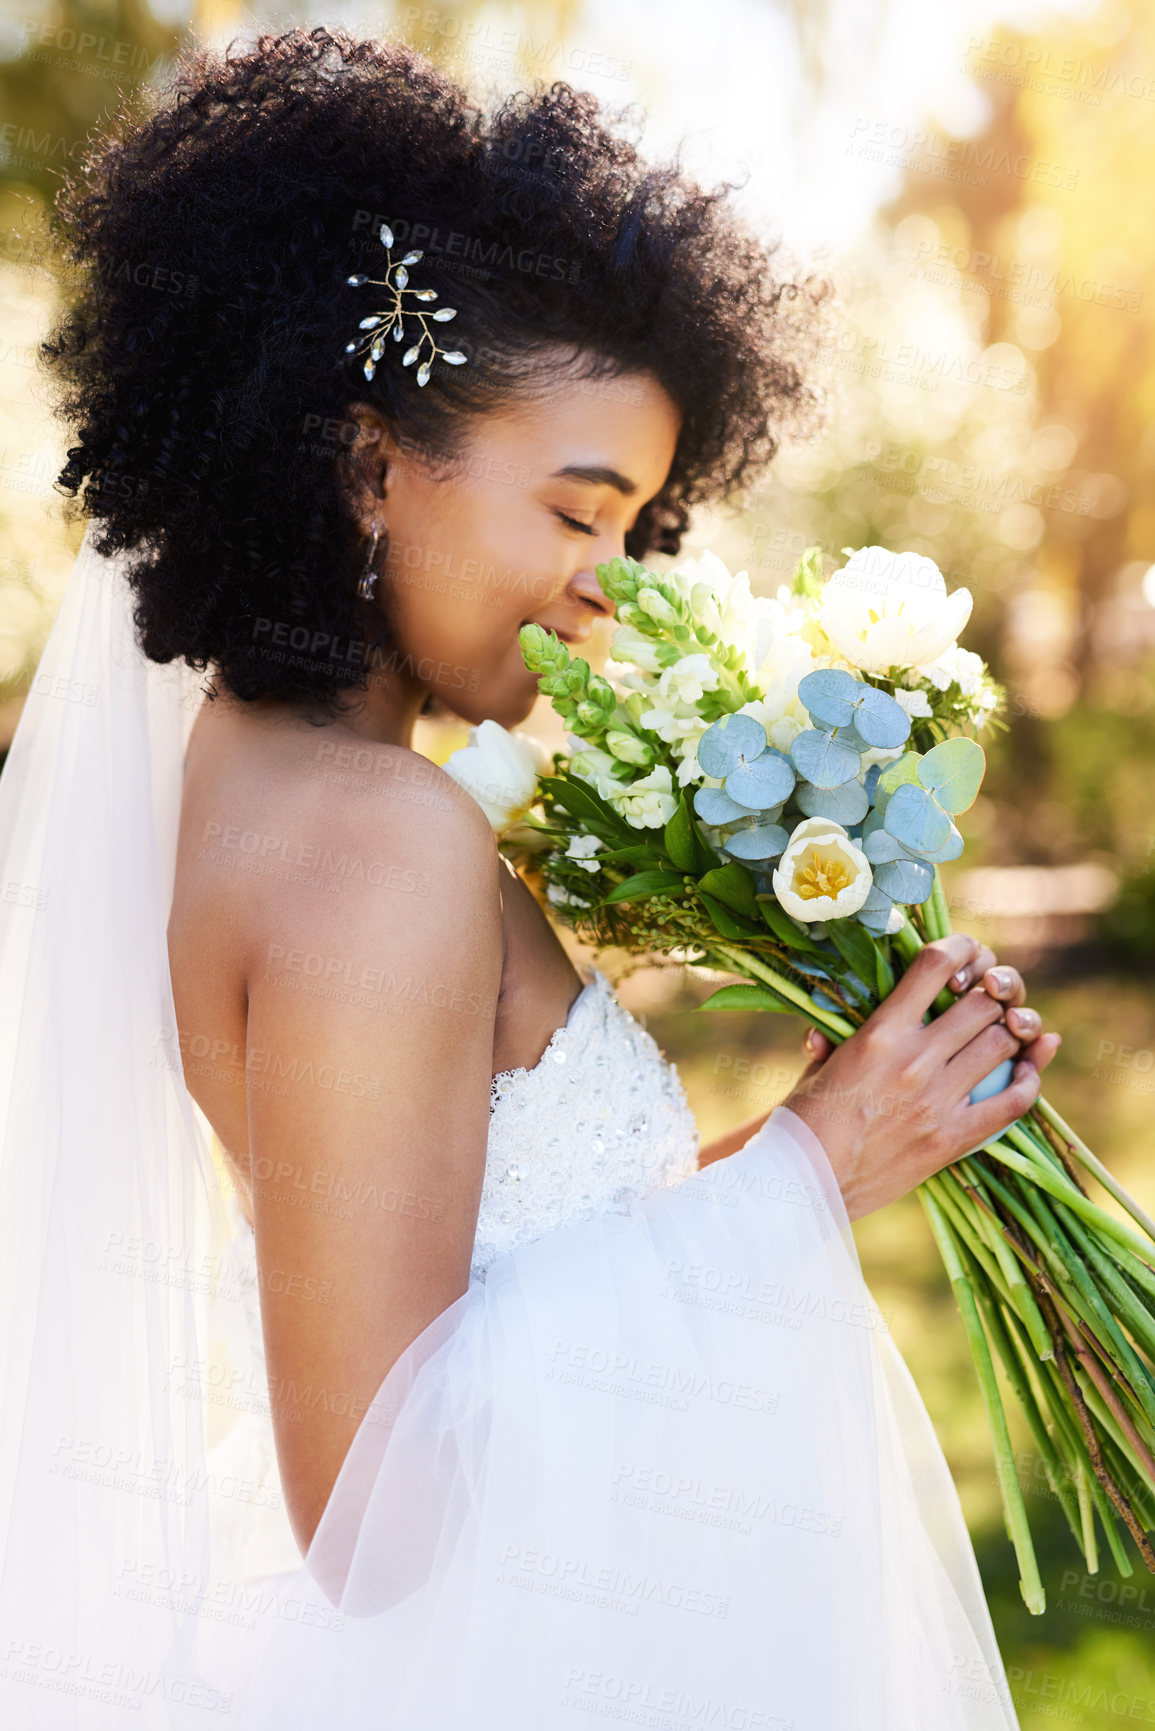 Buy stock photo Shot of a happy and beautiful young bride smelling her bouquet of flowers outdoors on her wedding day